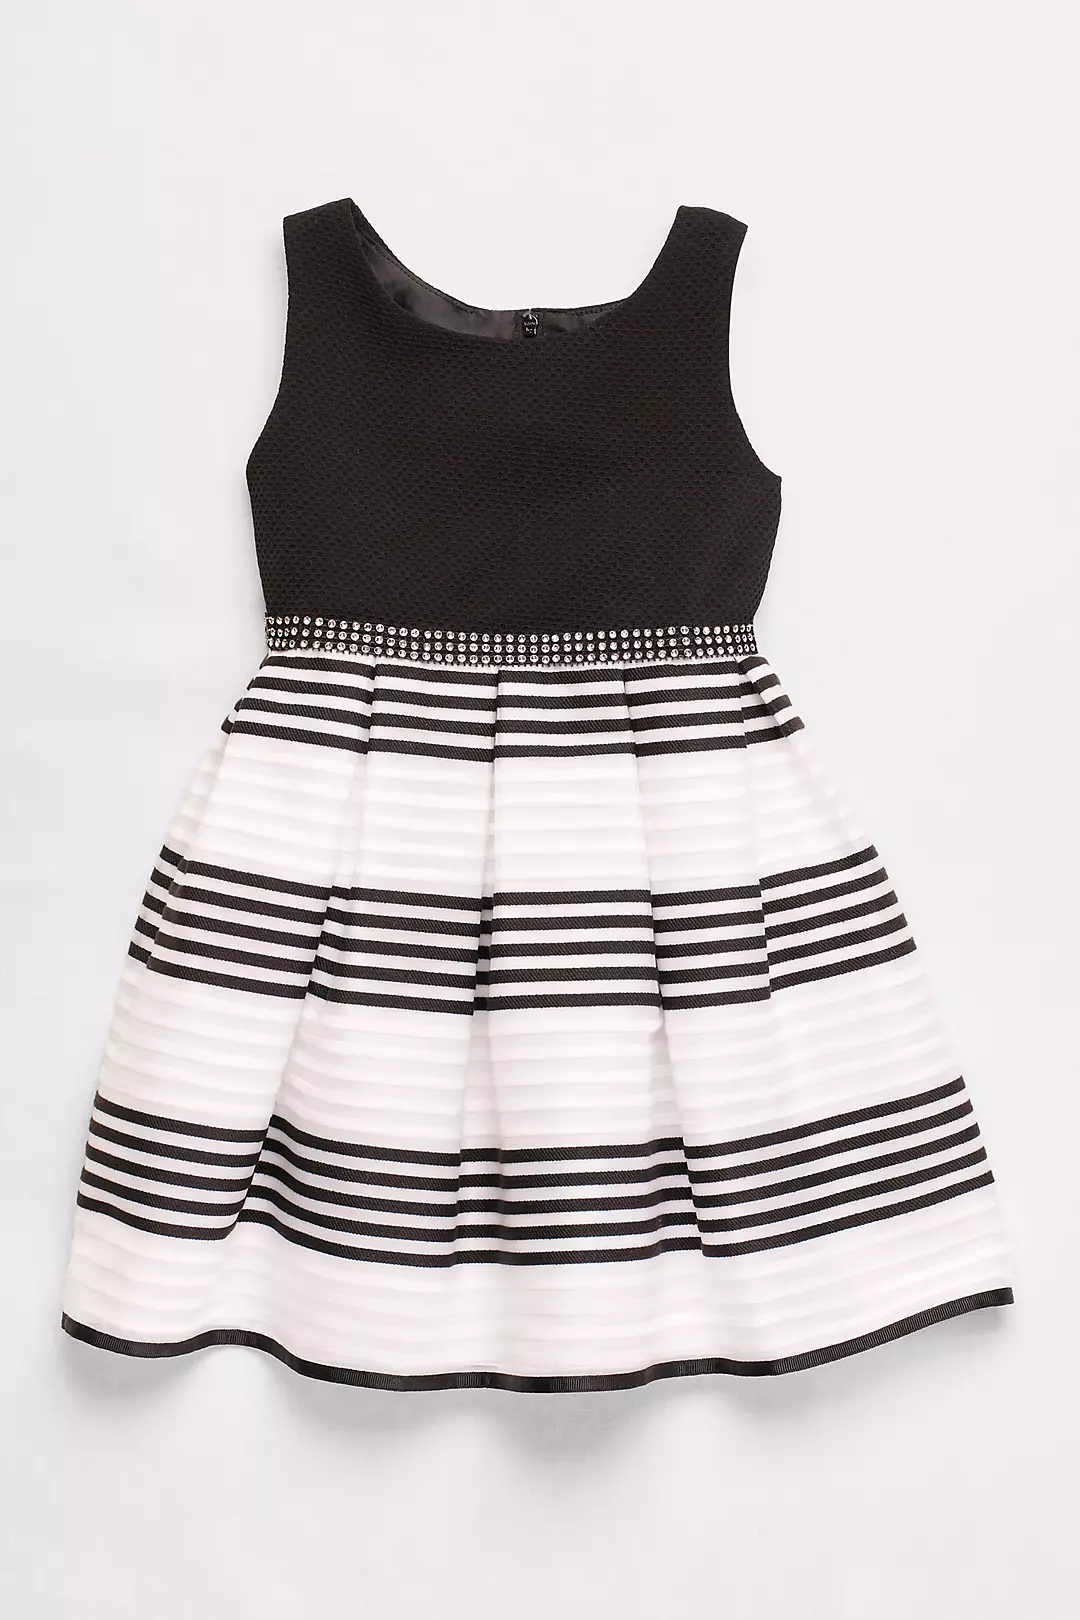 Striped Skirt Fit and Flare Dress with Beaded Belt Image 2